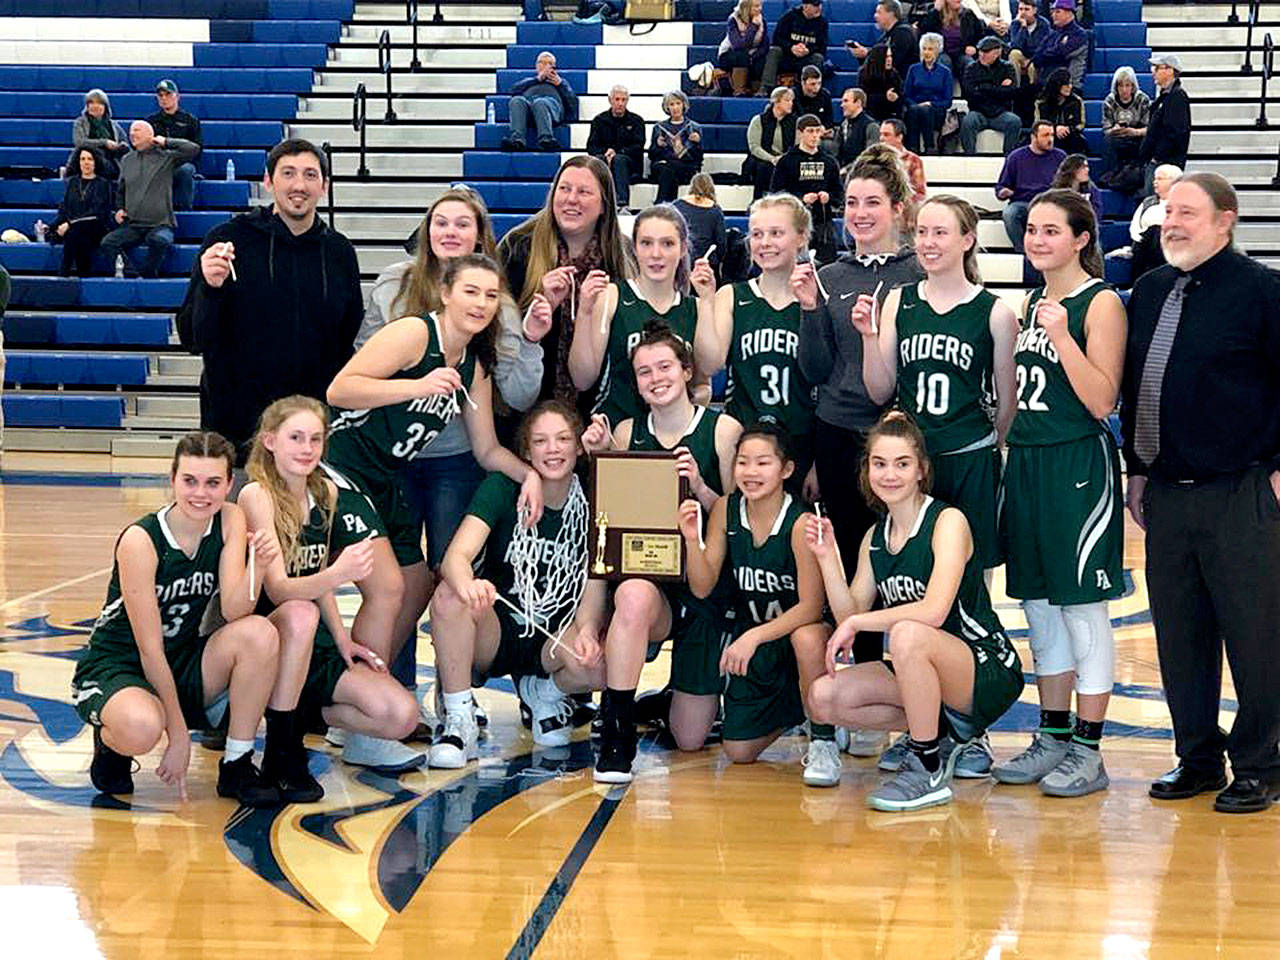 The Port Angeles Roughriders girls basketball team celebrates after winning the West Central District III 2A championship Saturday. The girls beat White River 53-32 to win the title.